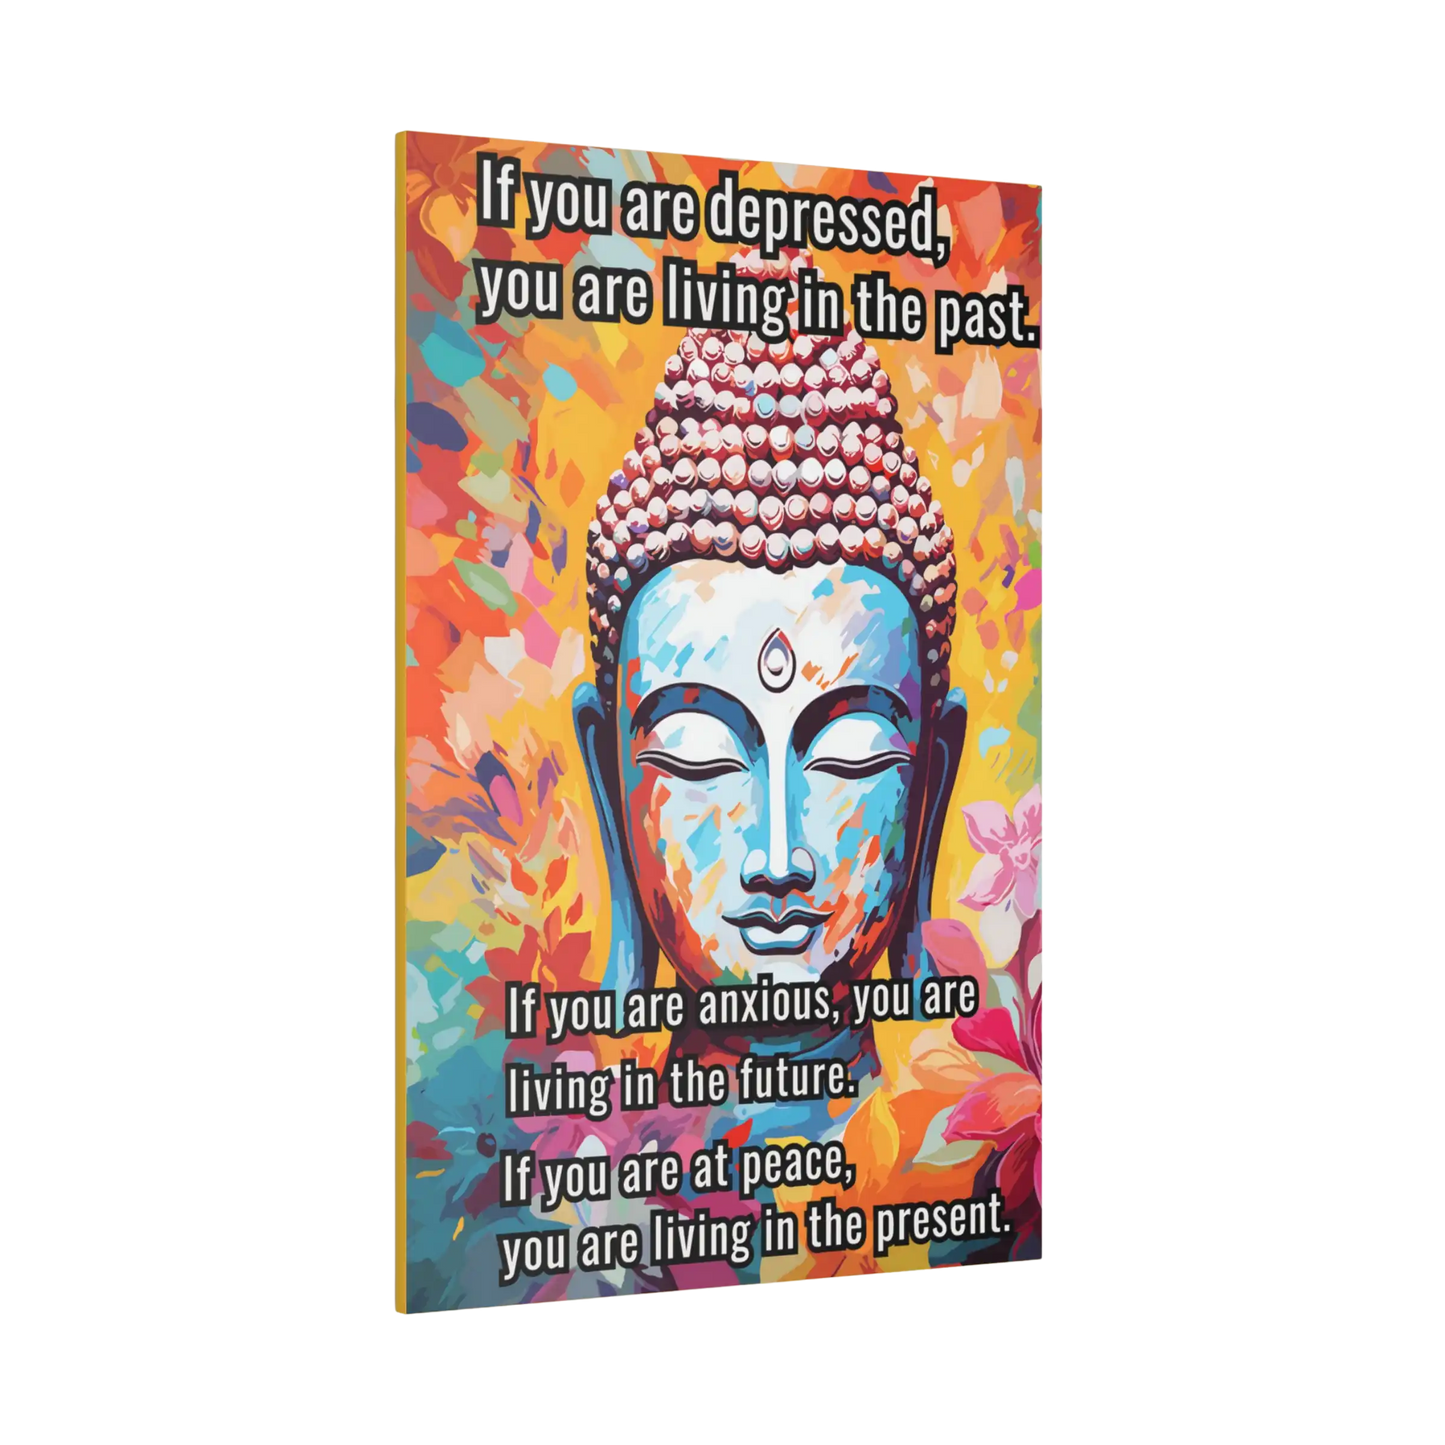 BUDDHA WALL CANVAS ART WITH INSPIRATIONAL QUOTE - Canvas